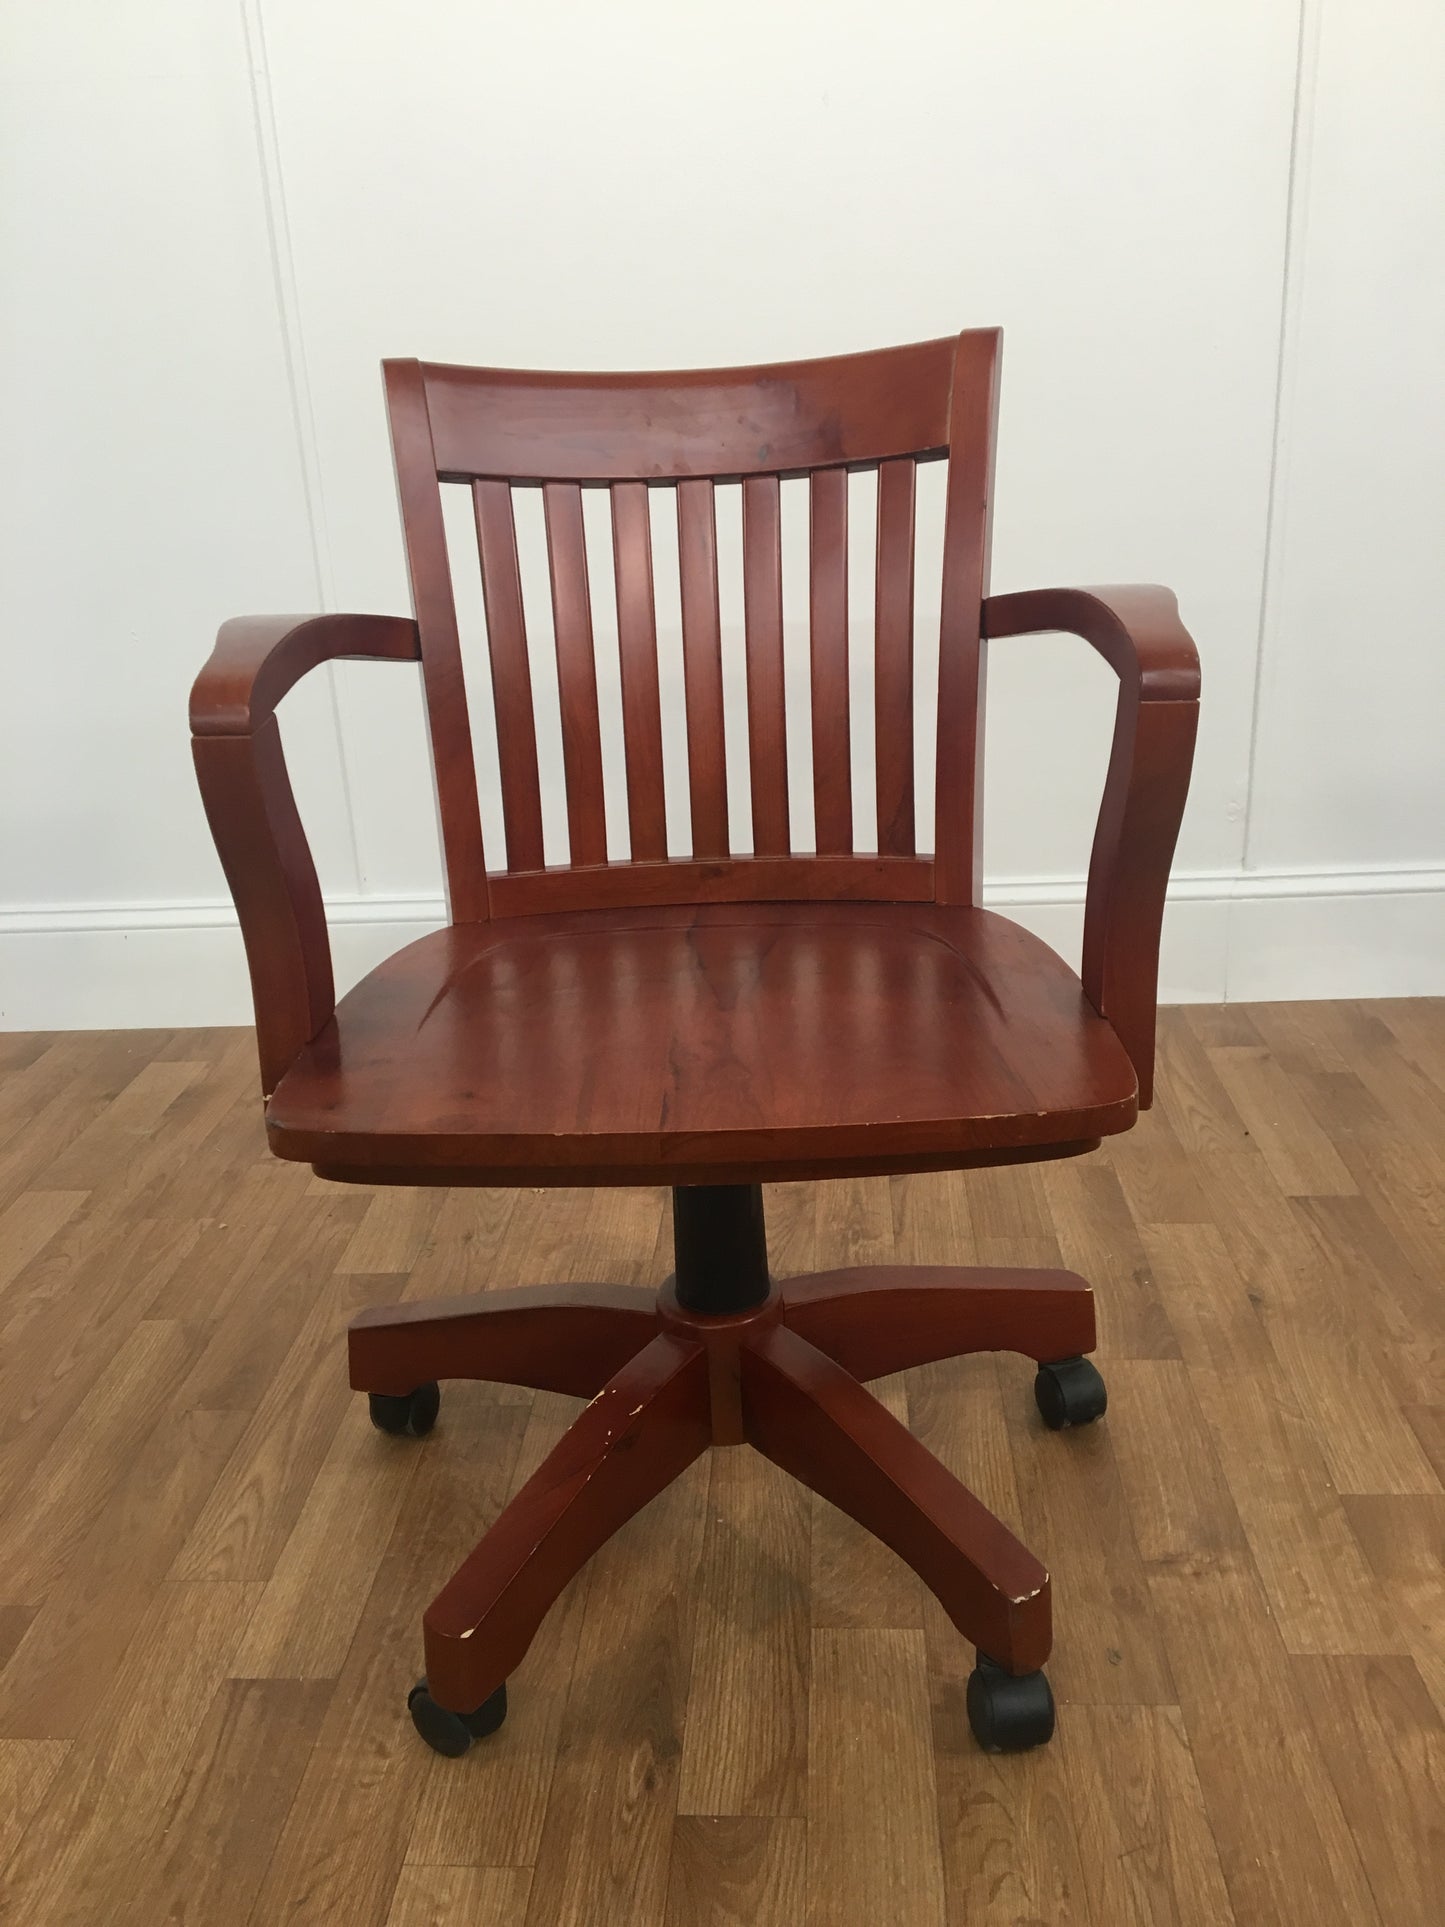 CHERRY WOOD OFFICE SWIVEL CHAIR, SLATTED BACK AND ROLLERS